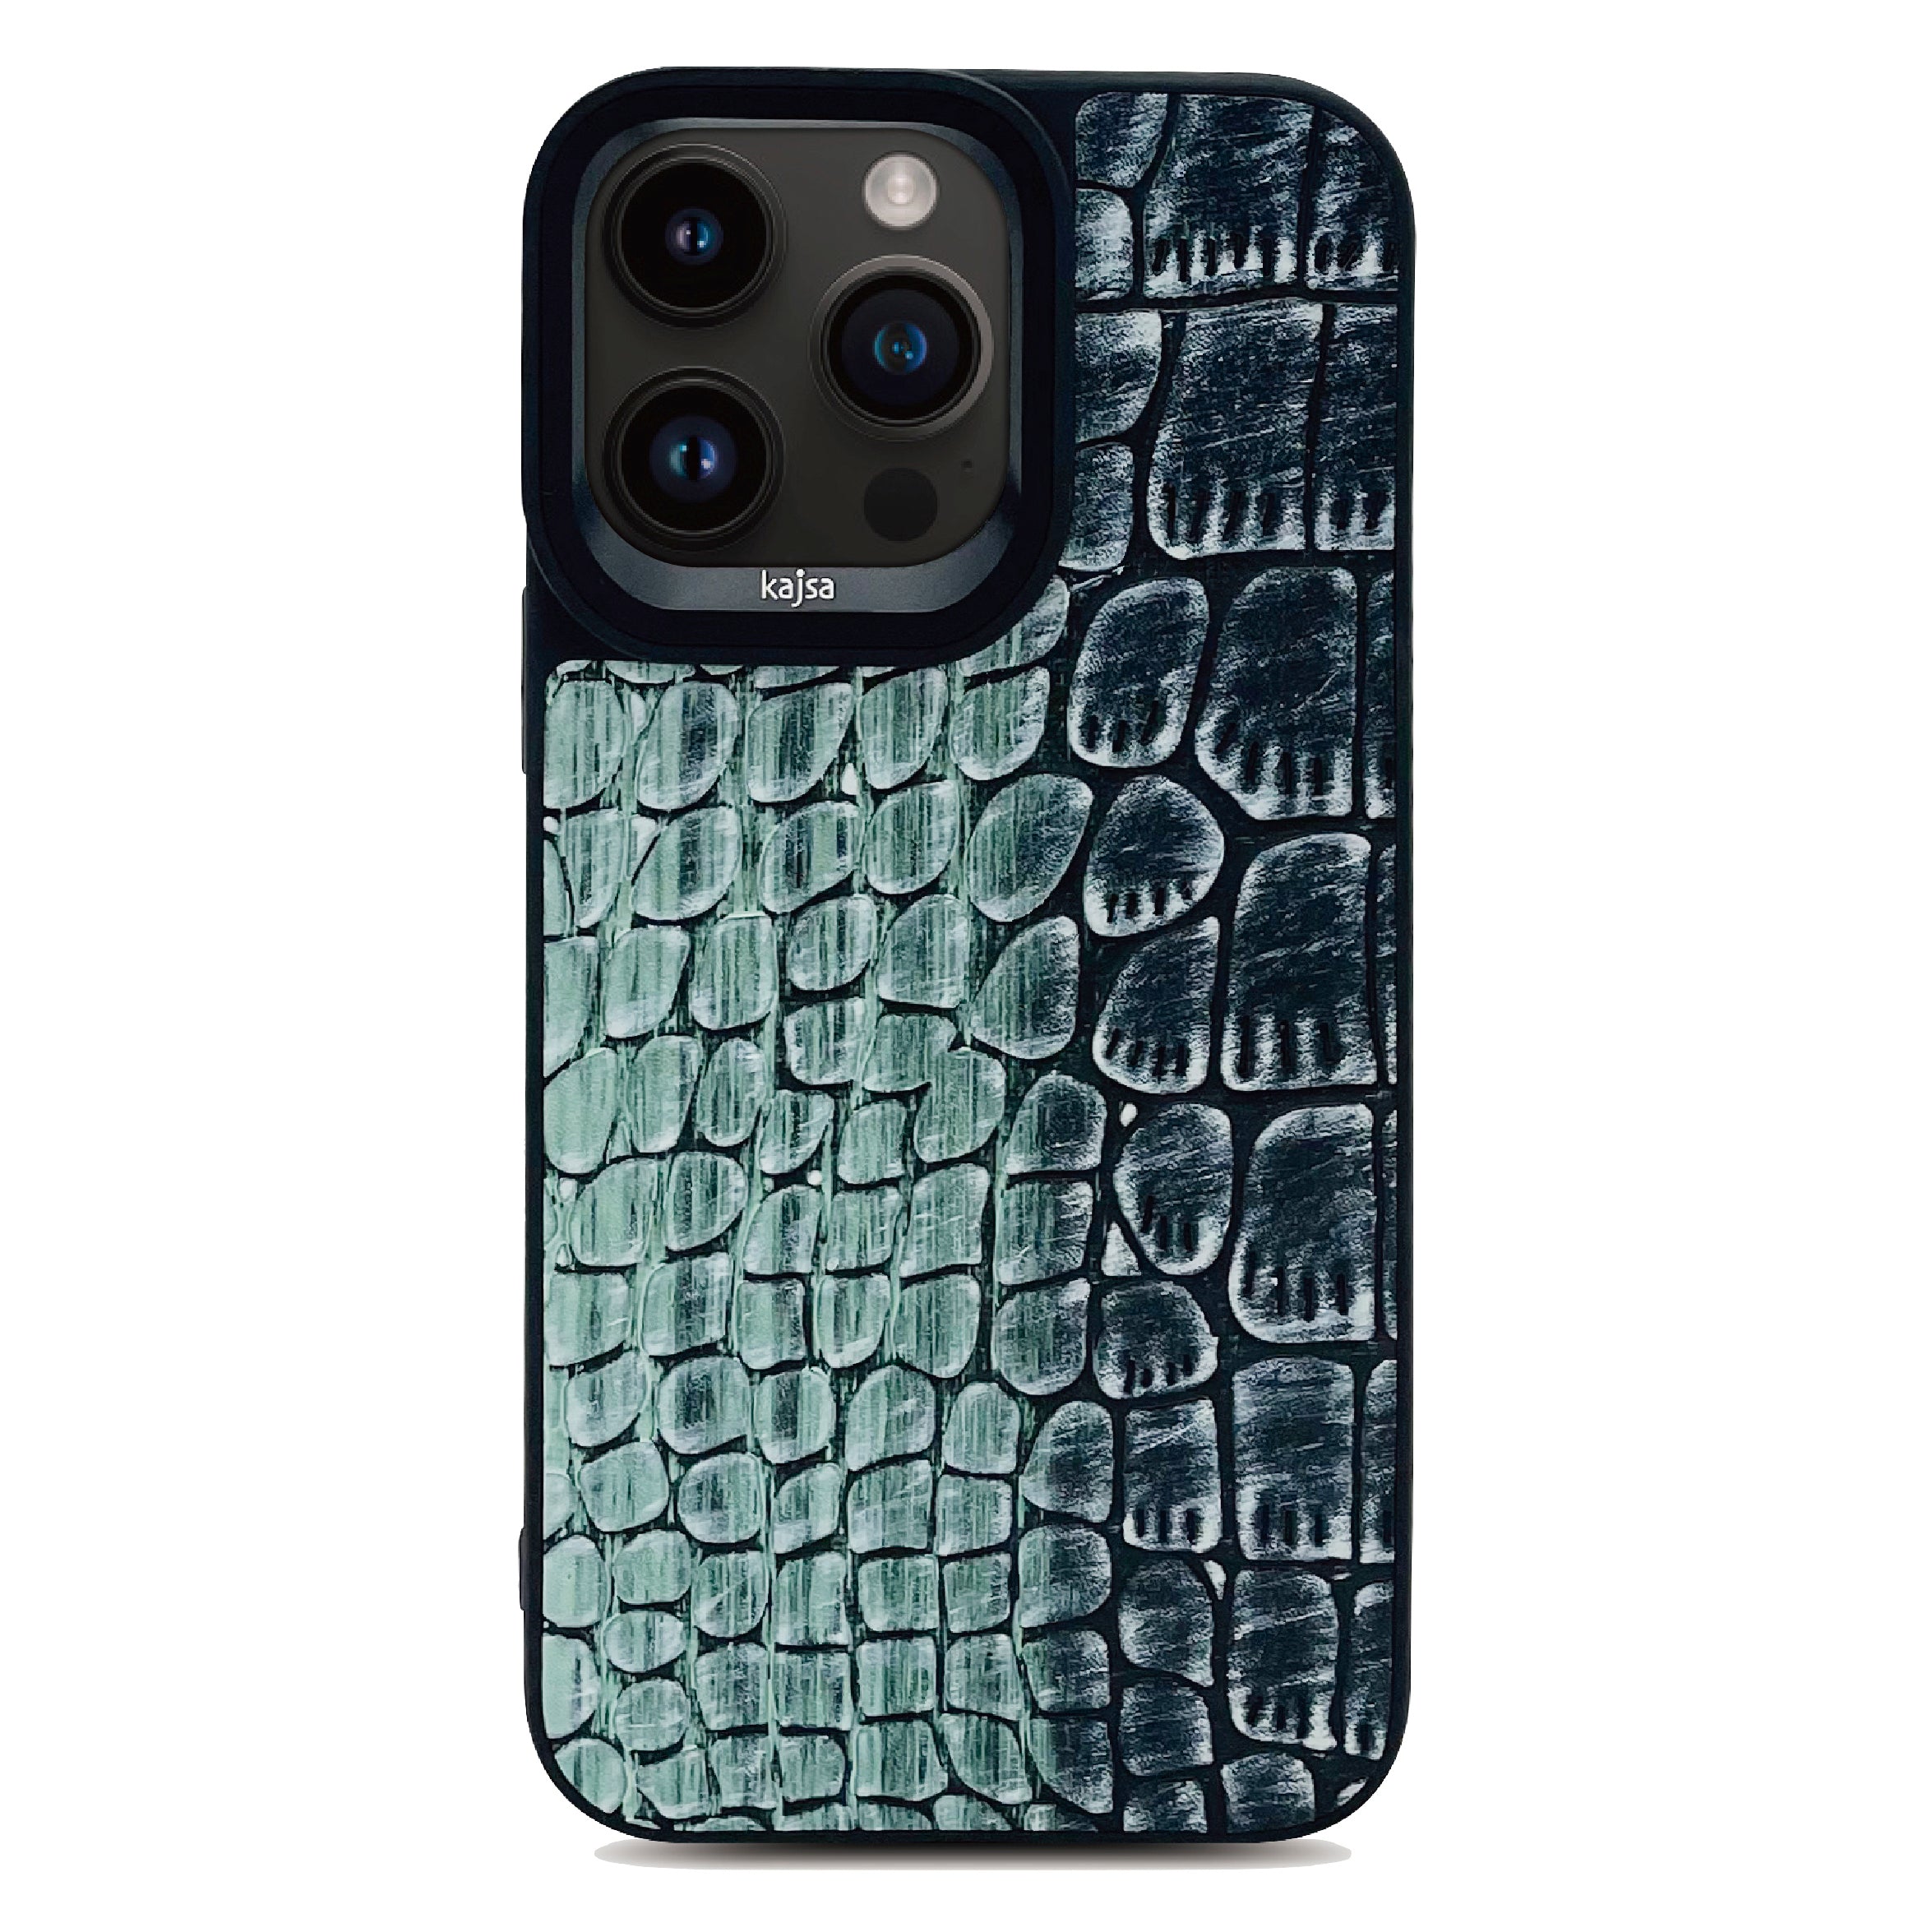 Glamorous Collection - Dual Snake Pattern Back Case for iPhone 14-Phone Case- phone case - phone cases- phone cover- iphone cover- iphone case- iphone cases- leather case- leather cases- DIYCASE - custom case - leather cover - hand strap case - croco pattern case - snake pattern case - carbon fiber phone case - phone case brand - unique phone case - high quality - phone case brand - protective case - buy phone case hong kong - online buy phone case - iphone‎手機殼 - 客製化手機殼 - samsung ‎手機殼 - 香港手機殼 - 買電話殼